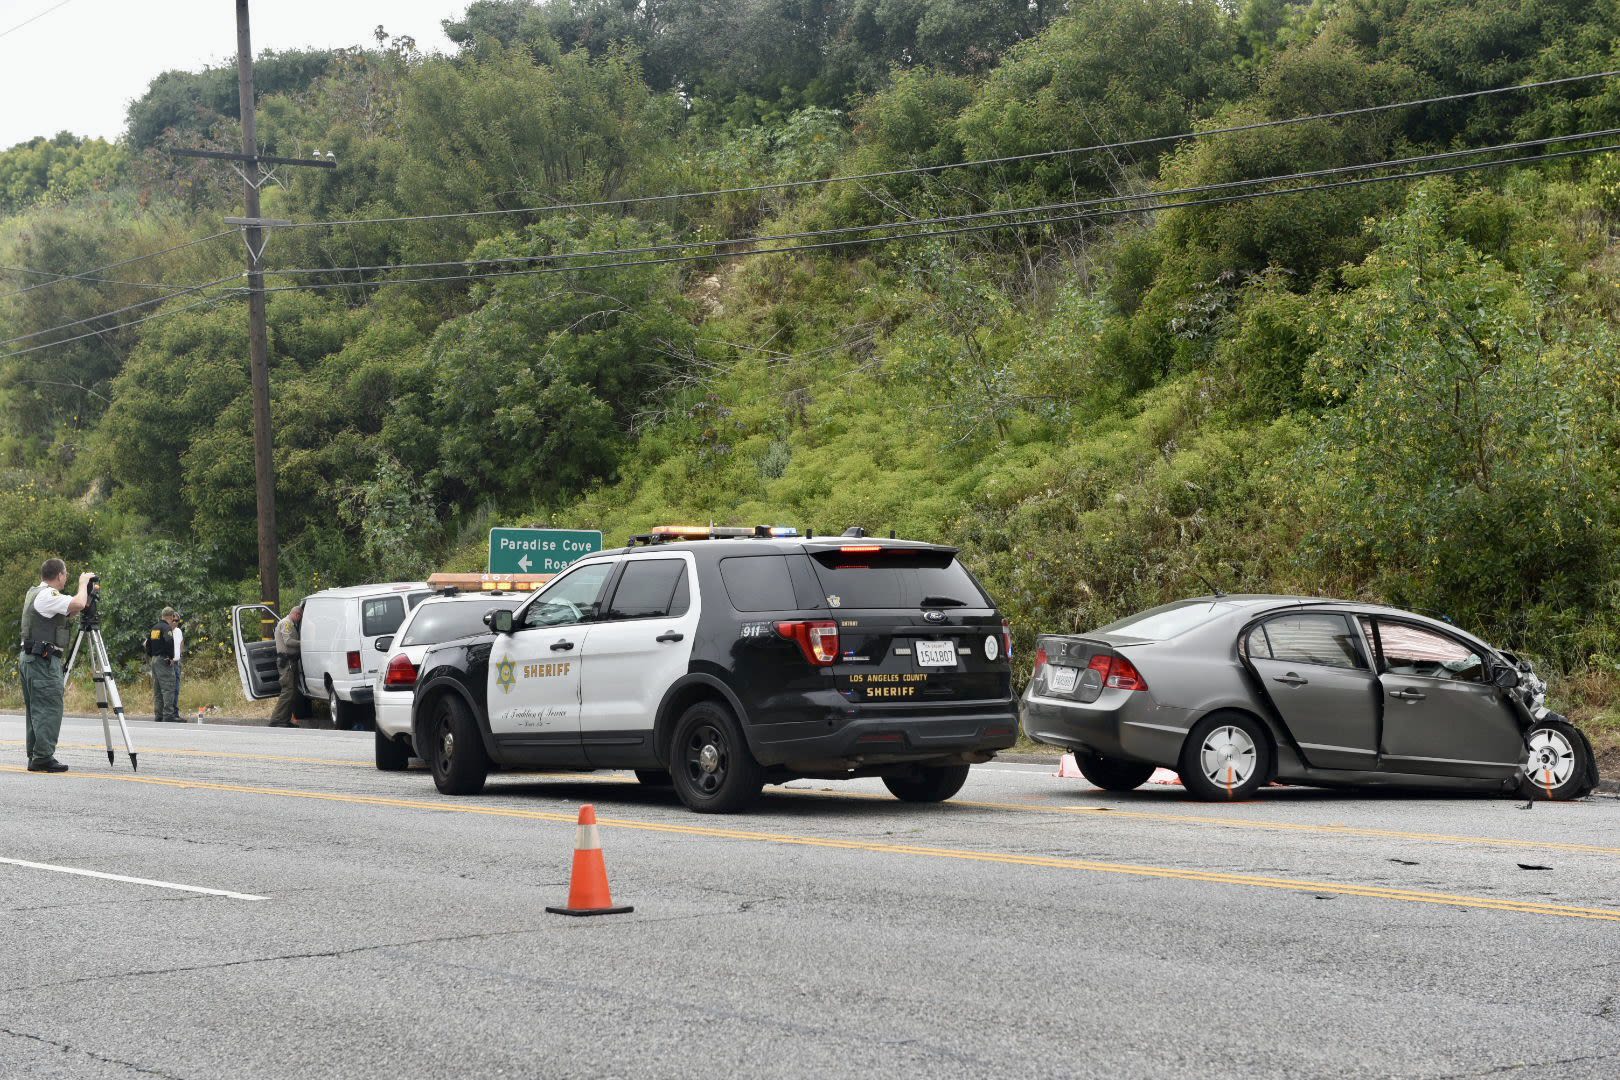 BREAKING: Fatal traffic Collision on PCH, near Winding Way and Paradise Cove • The Malibu Times